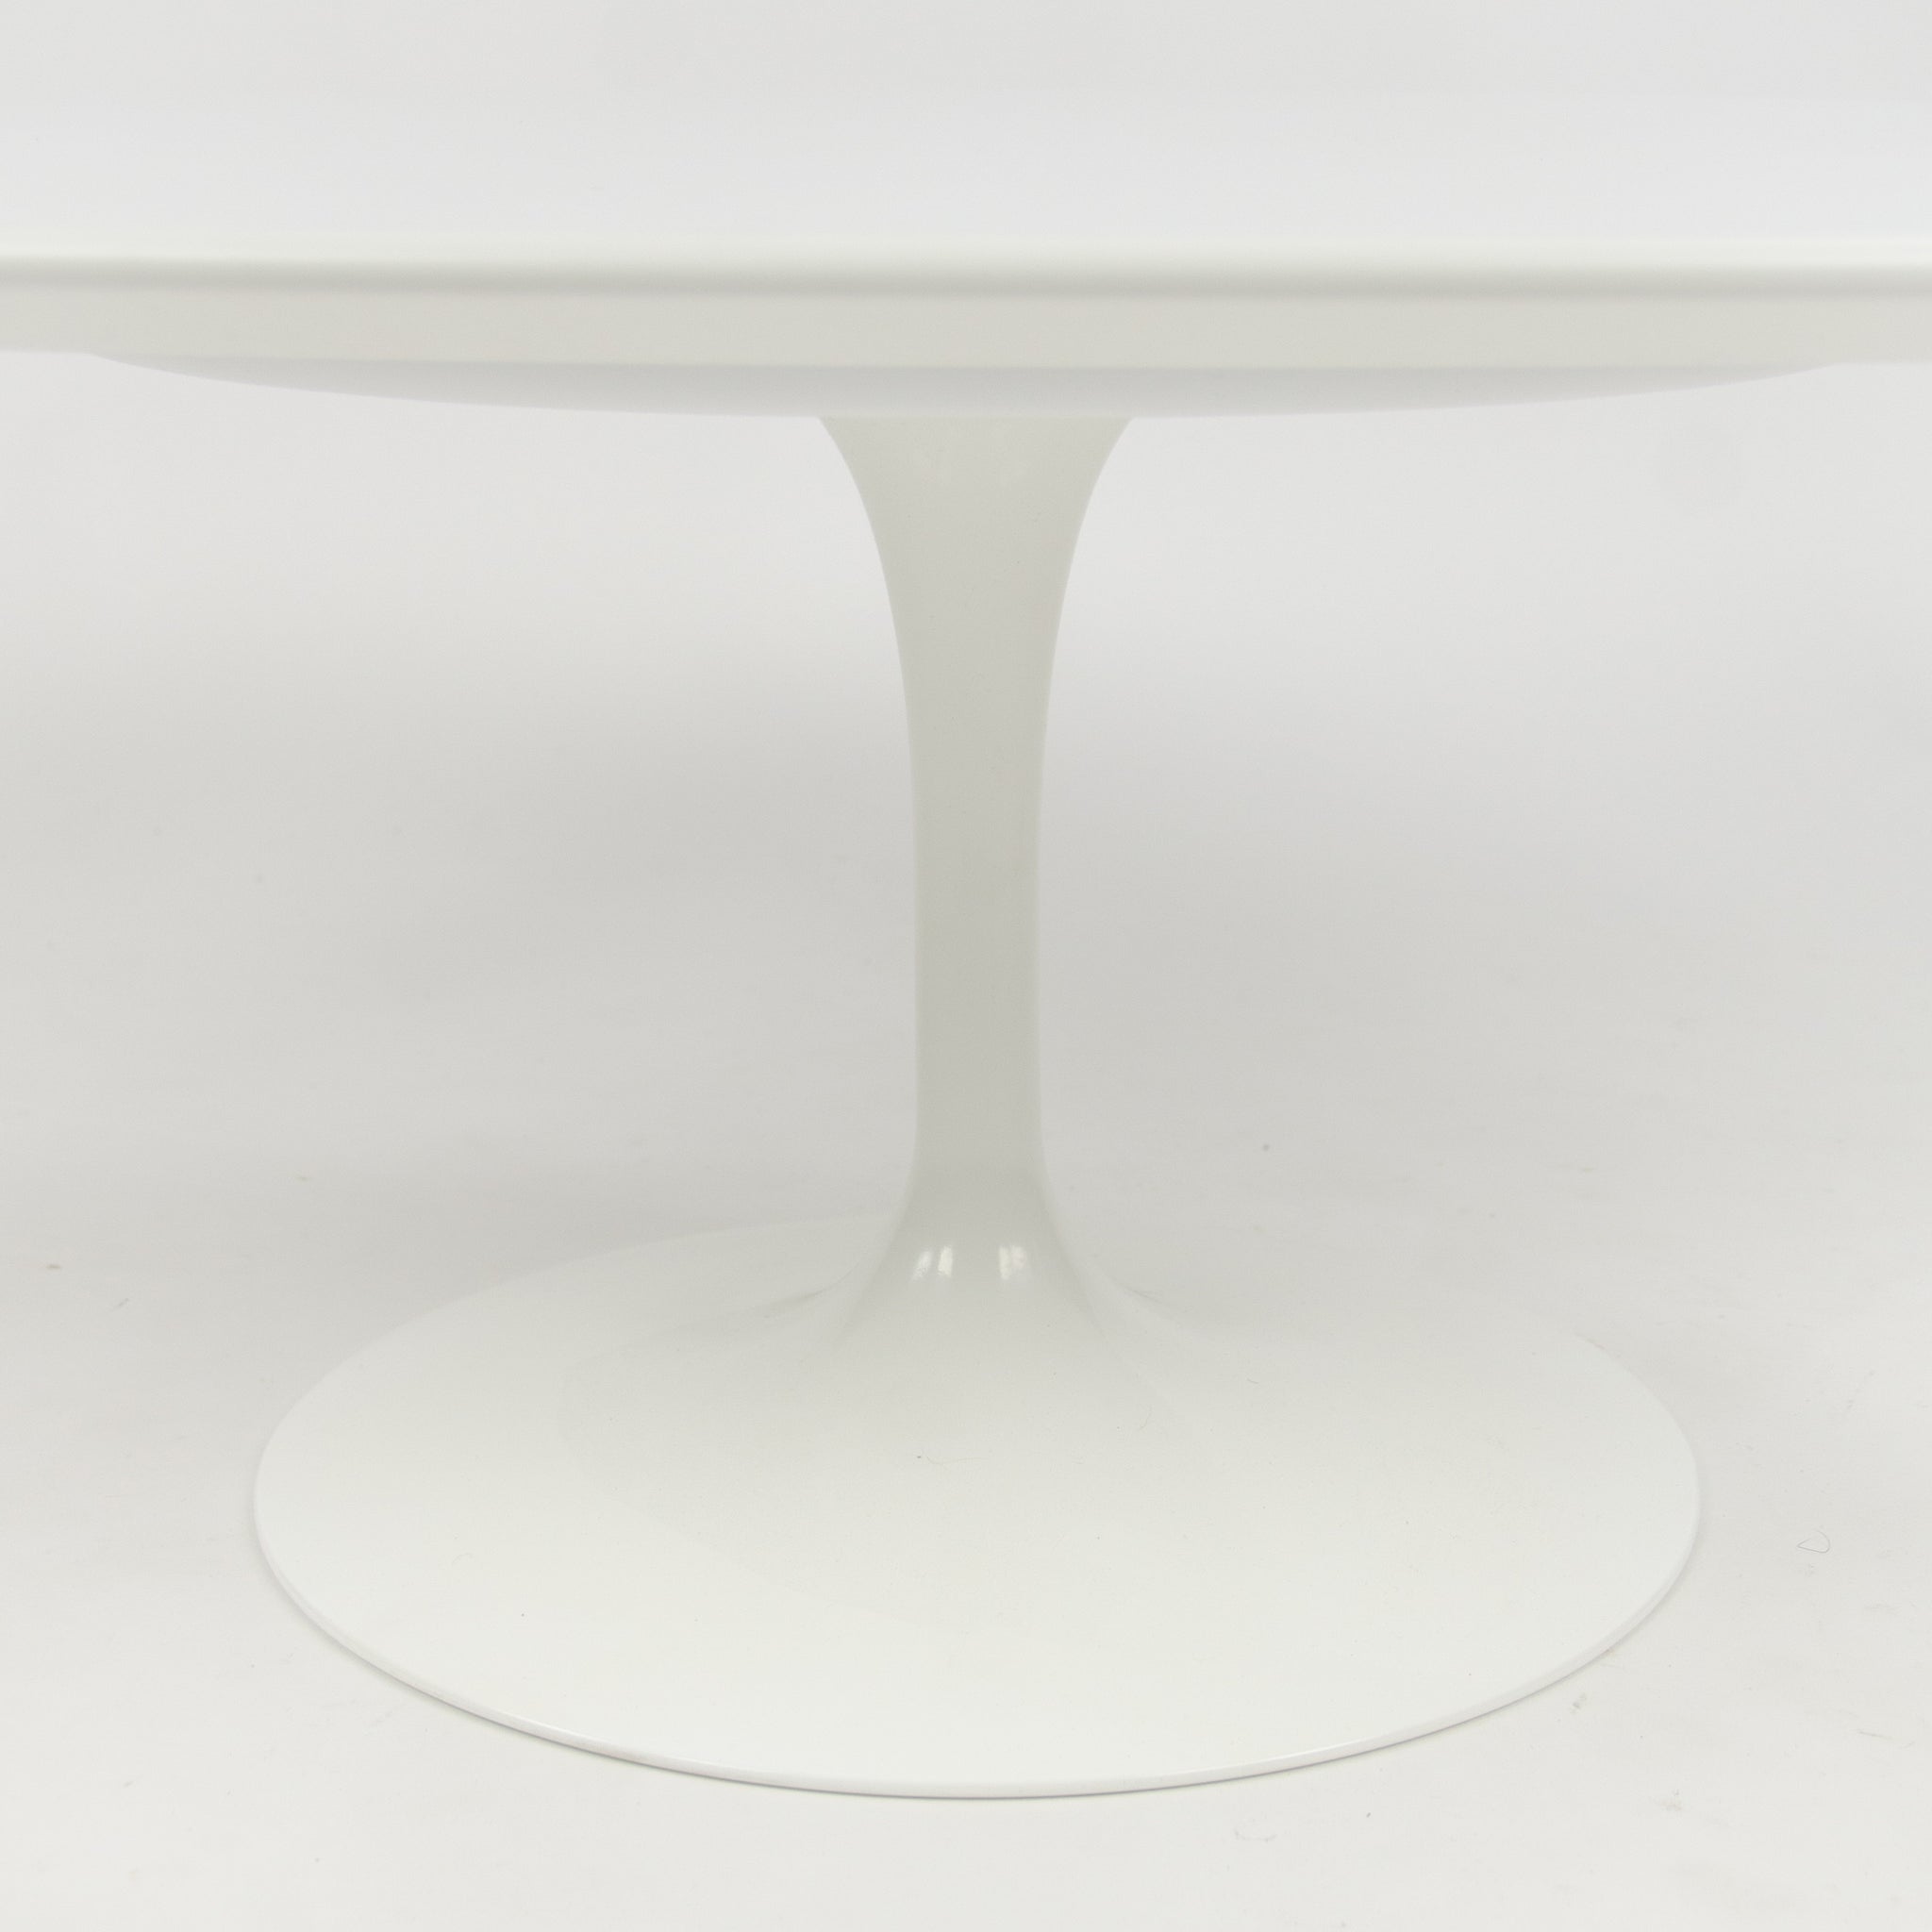 SOLD Eero Saarinen For Knoll 42 Inch Tulip Coffee Table White Laminate NOS